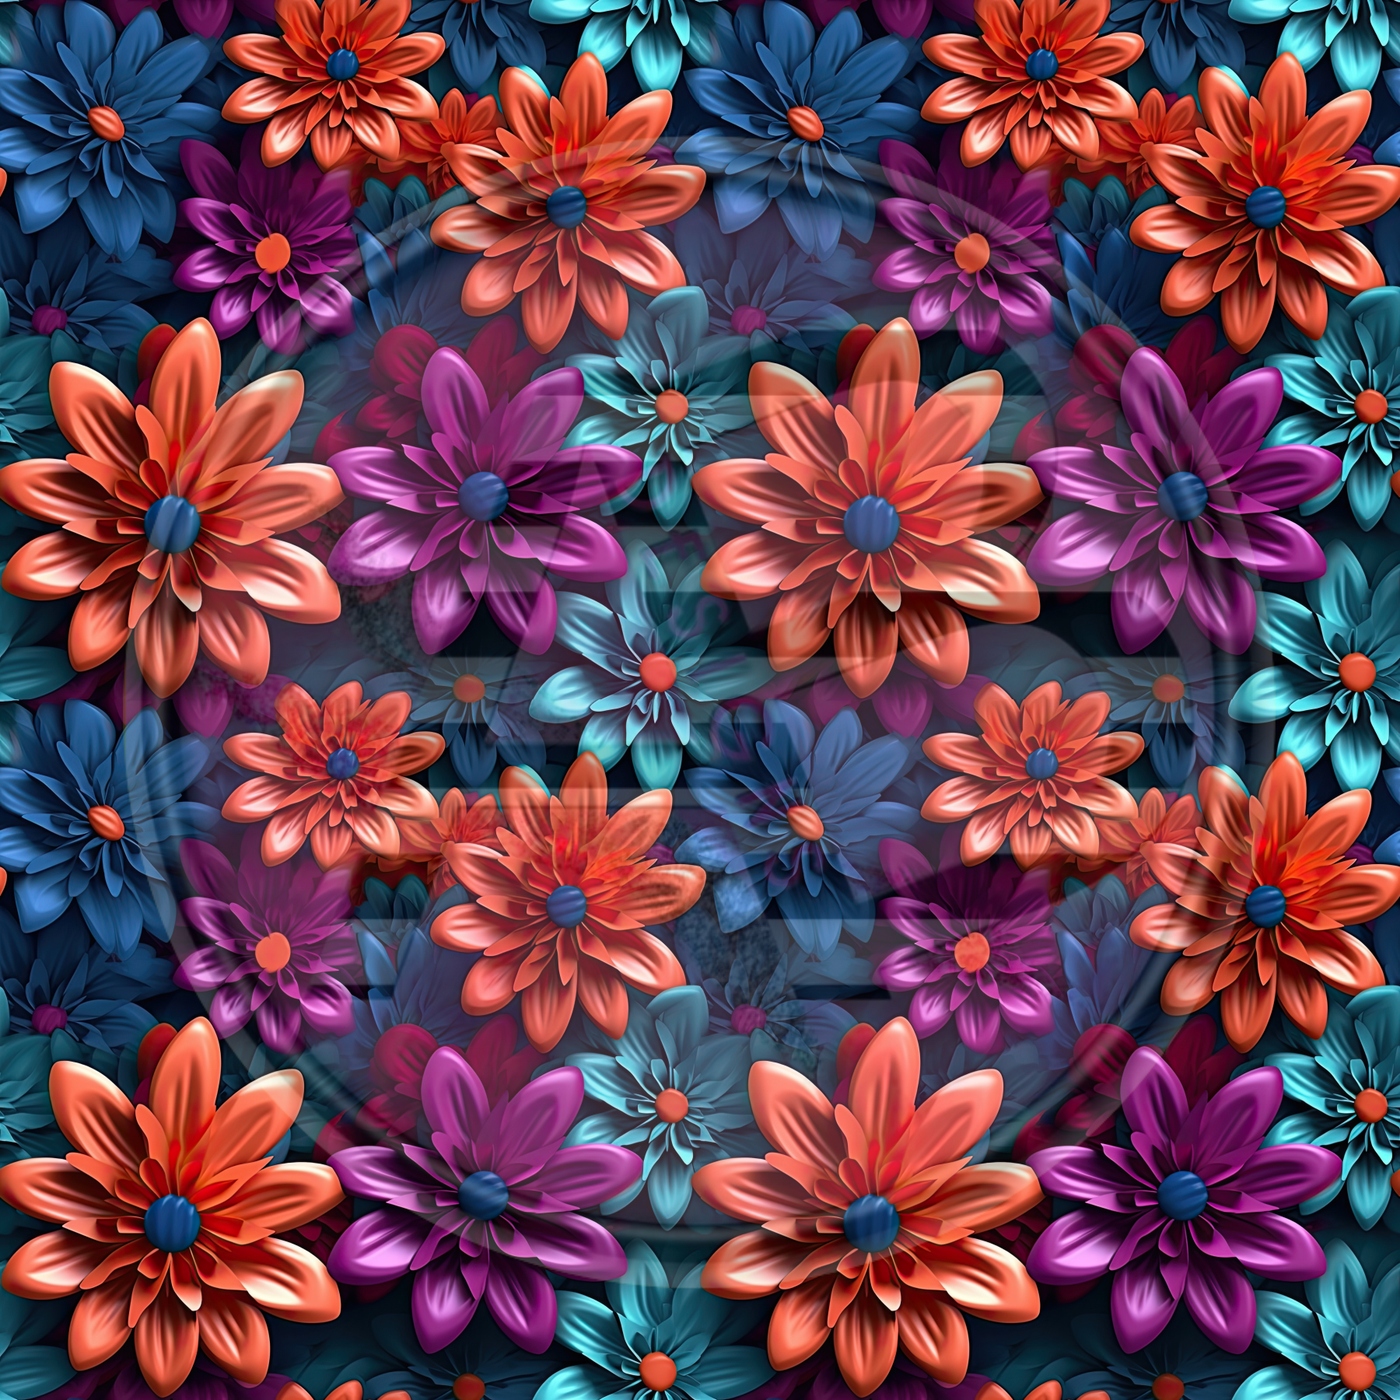 Adhesive Patterned Vinyl - 3D Floral 14 Smaller